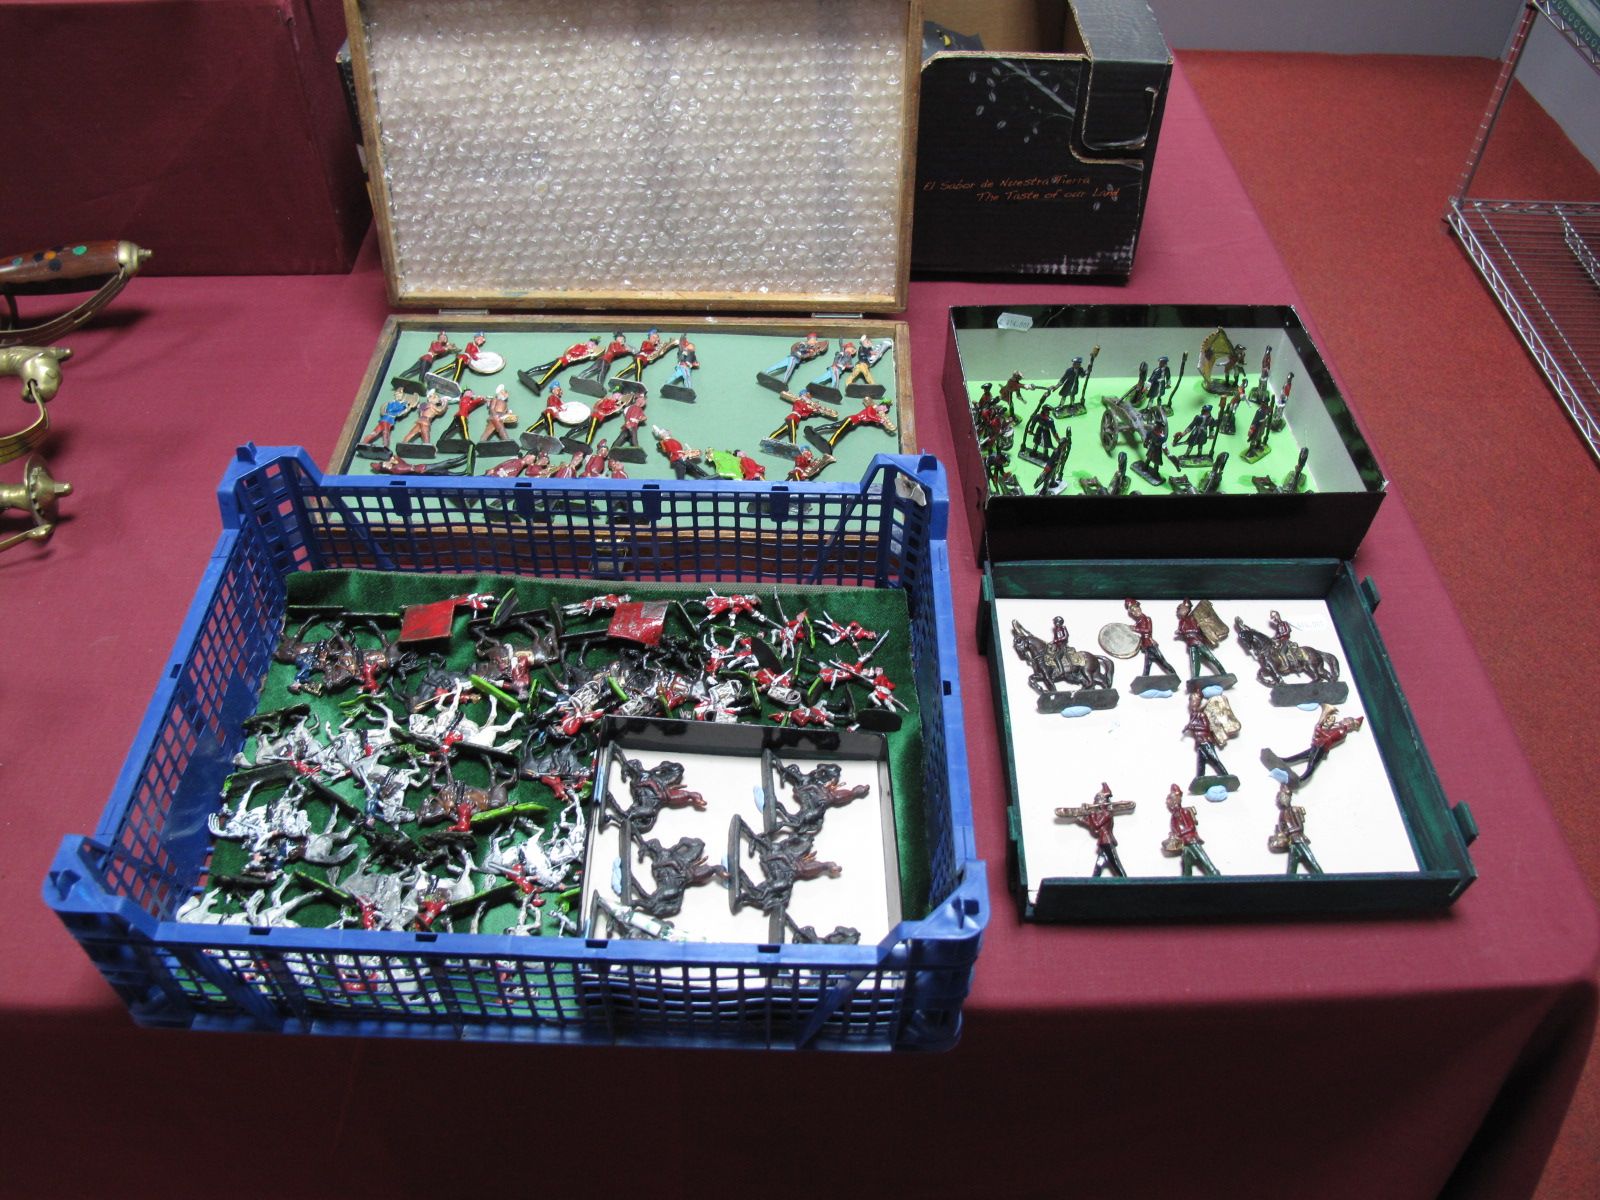 A Quantity of XX Century Lead Flat Military Figures and Cannons. Many depicting XVIII styles.